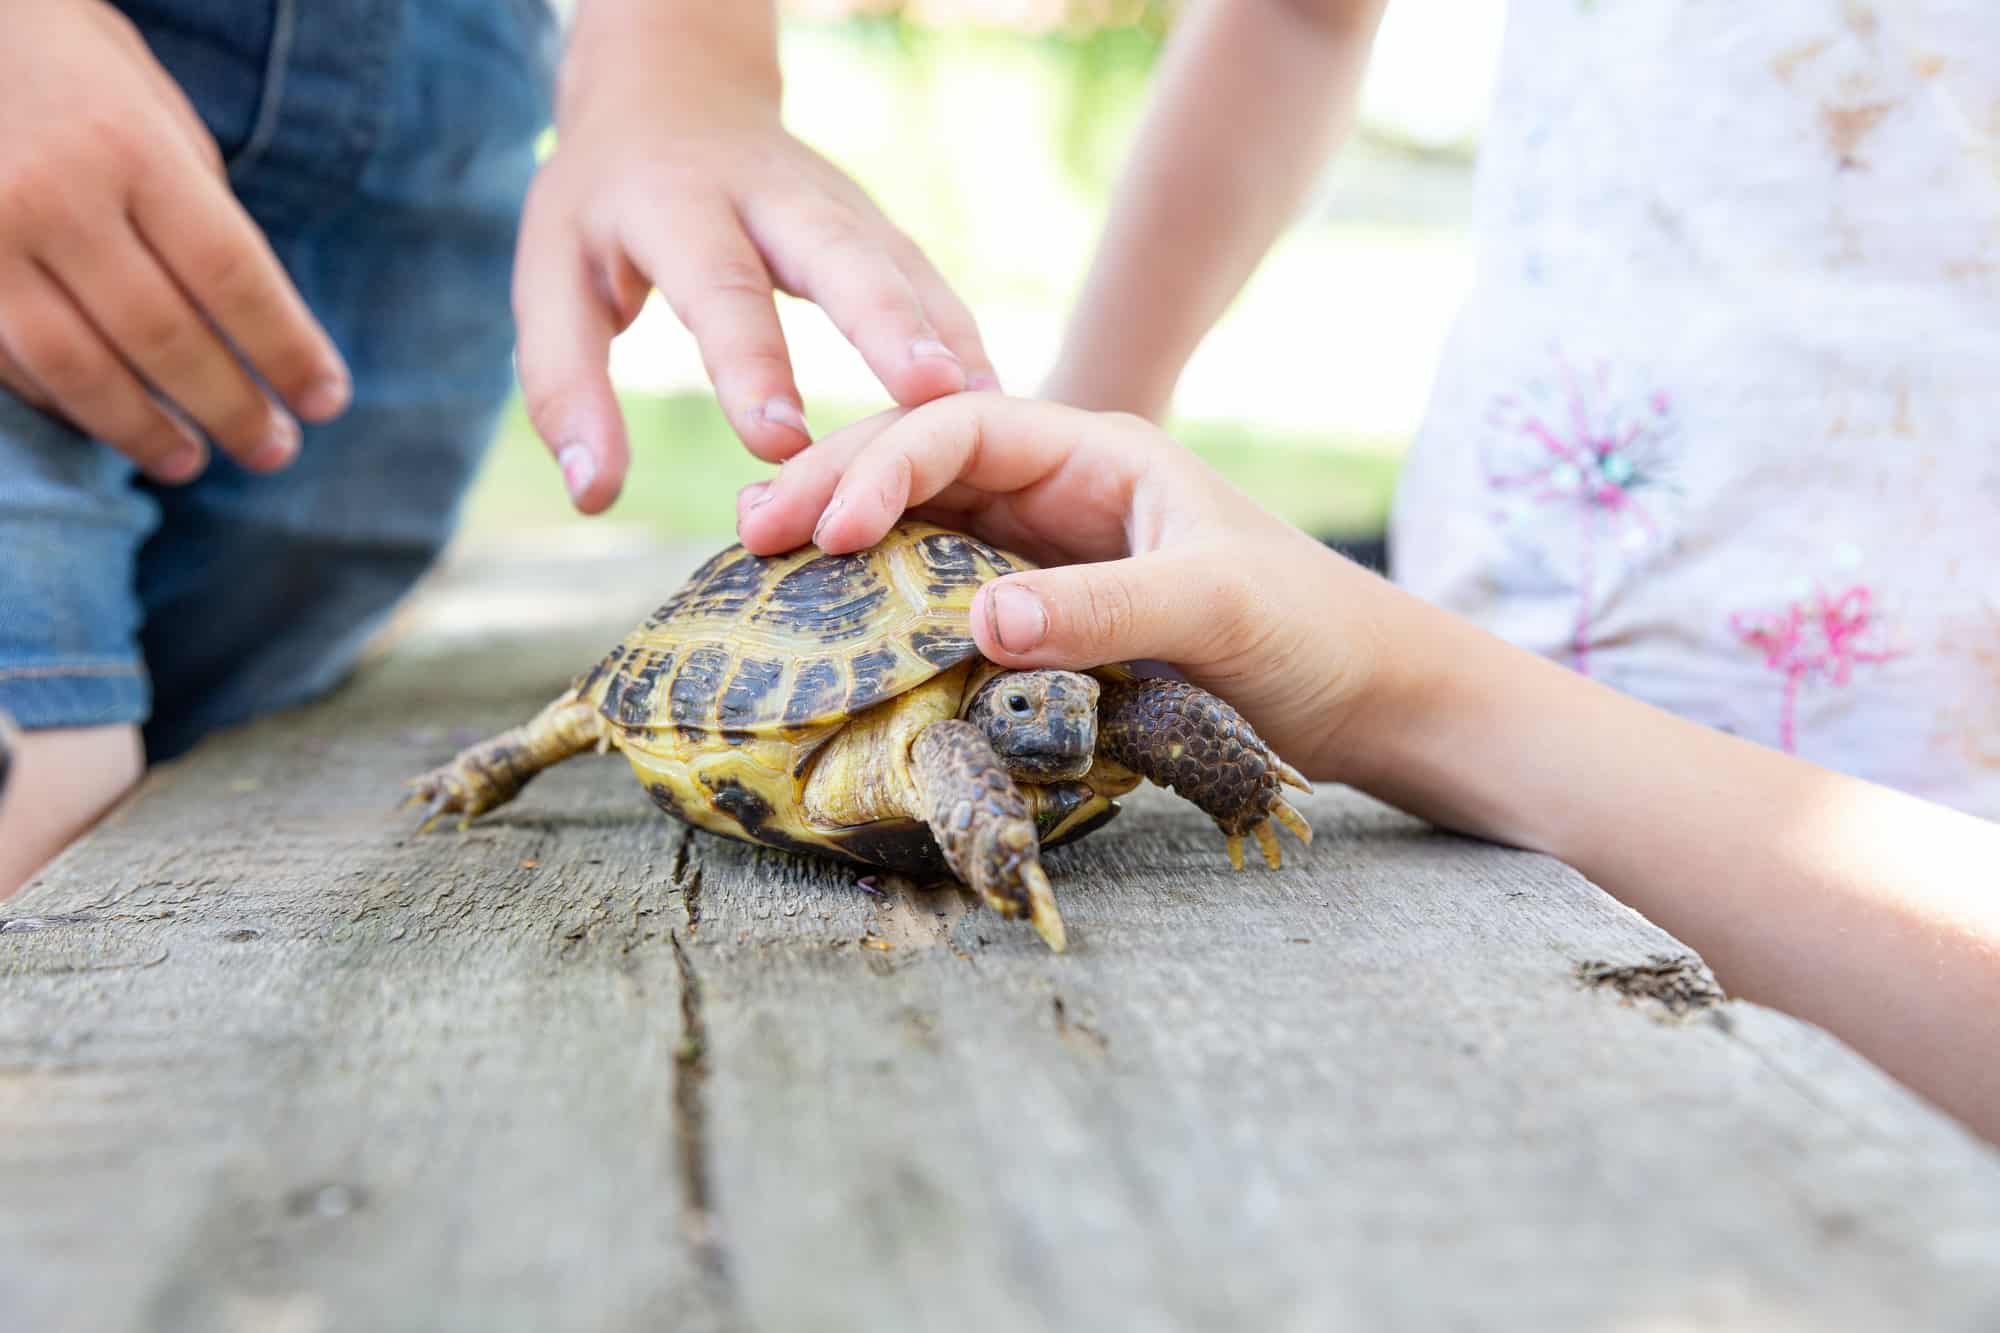 Children hold the Central Asian turtle by the shell with their hands and stroke it.